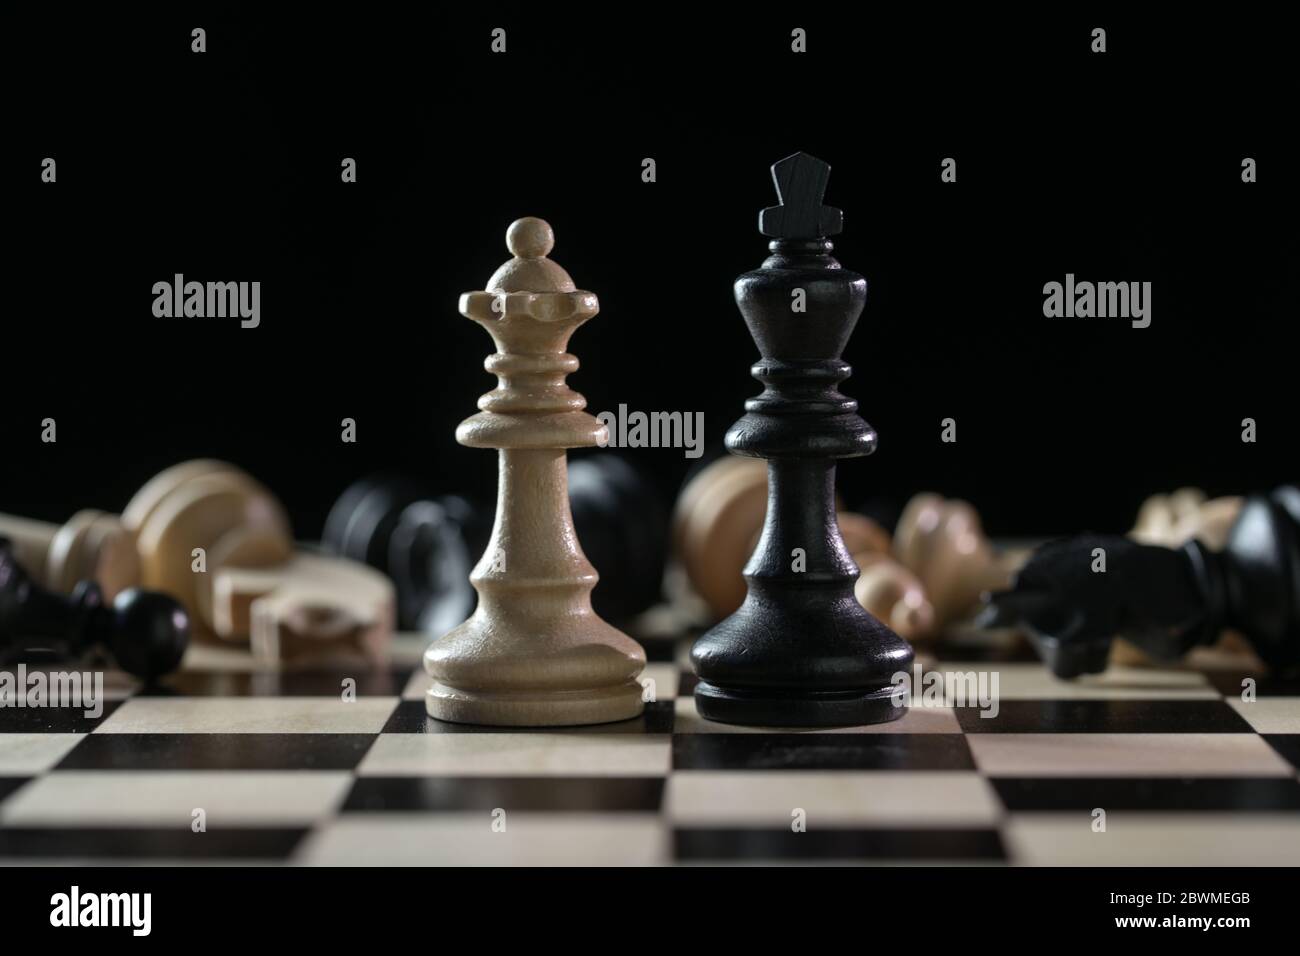 Chess pieces queen and king in front of a of fallen chessmen after a battlefield on a chessboard against a black background, concept of abuse of power Stock Photo